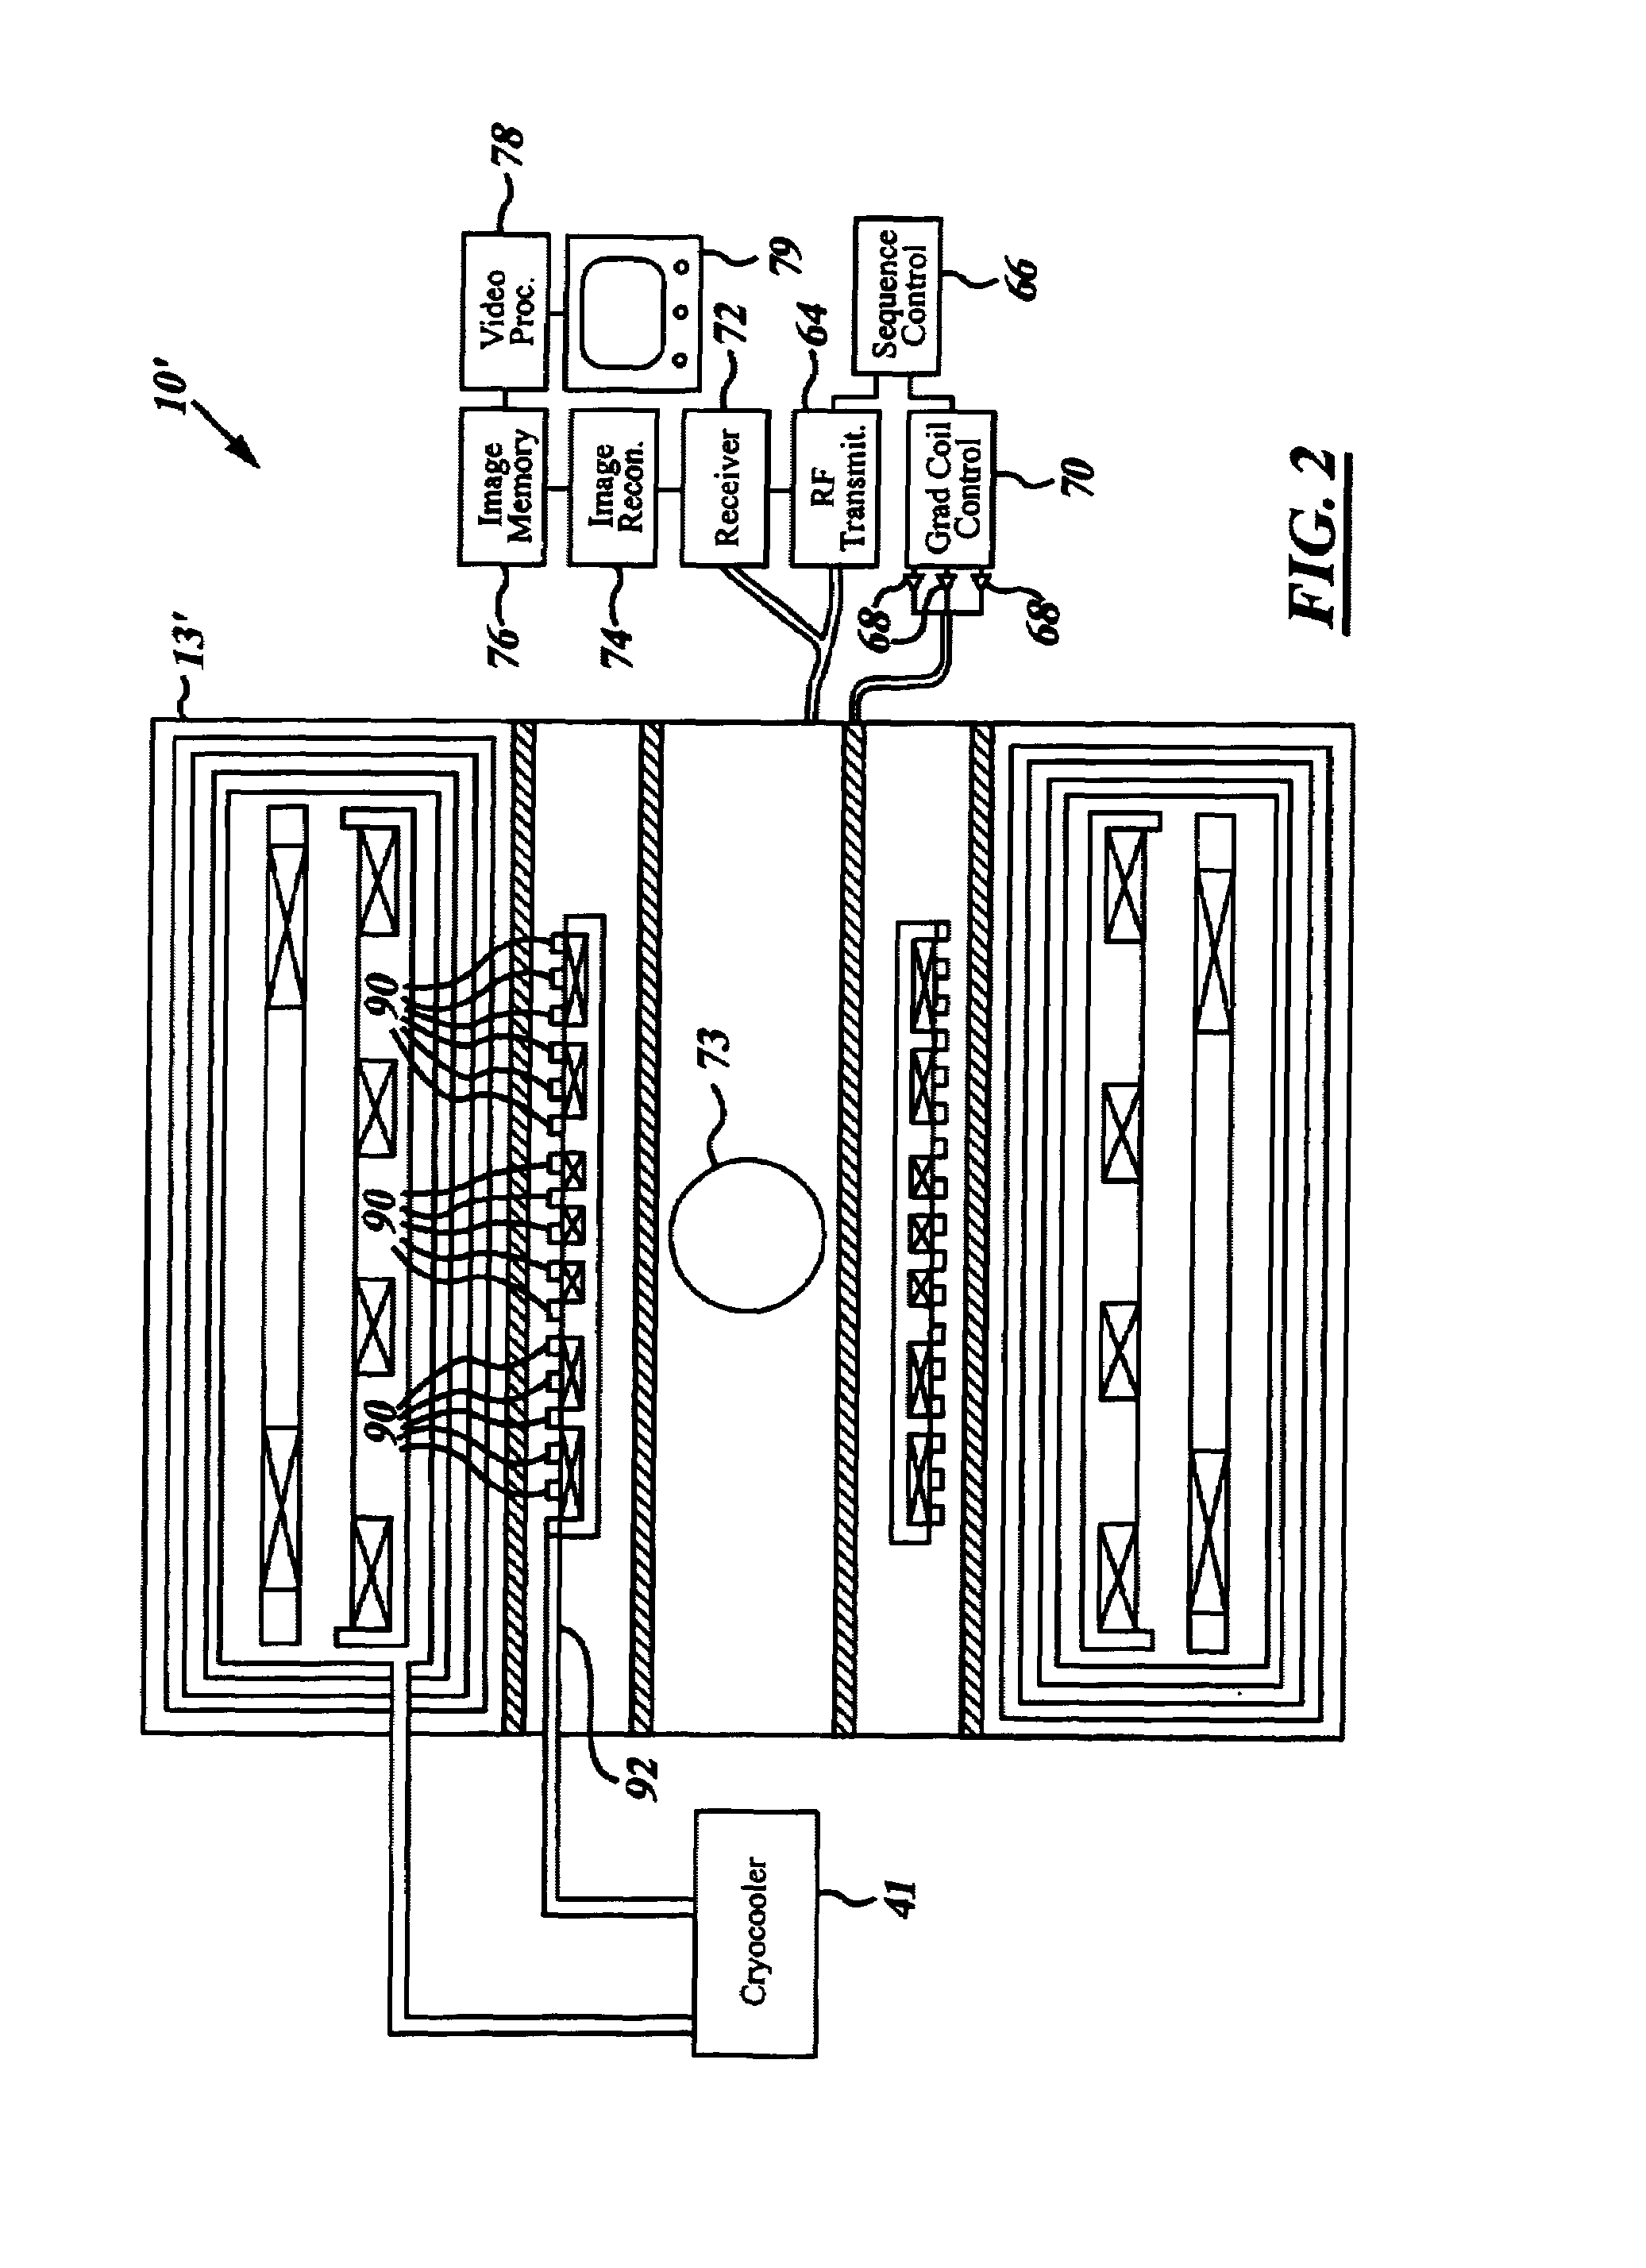 MRI system utilizing supplemental static field-shaping coils